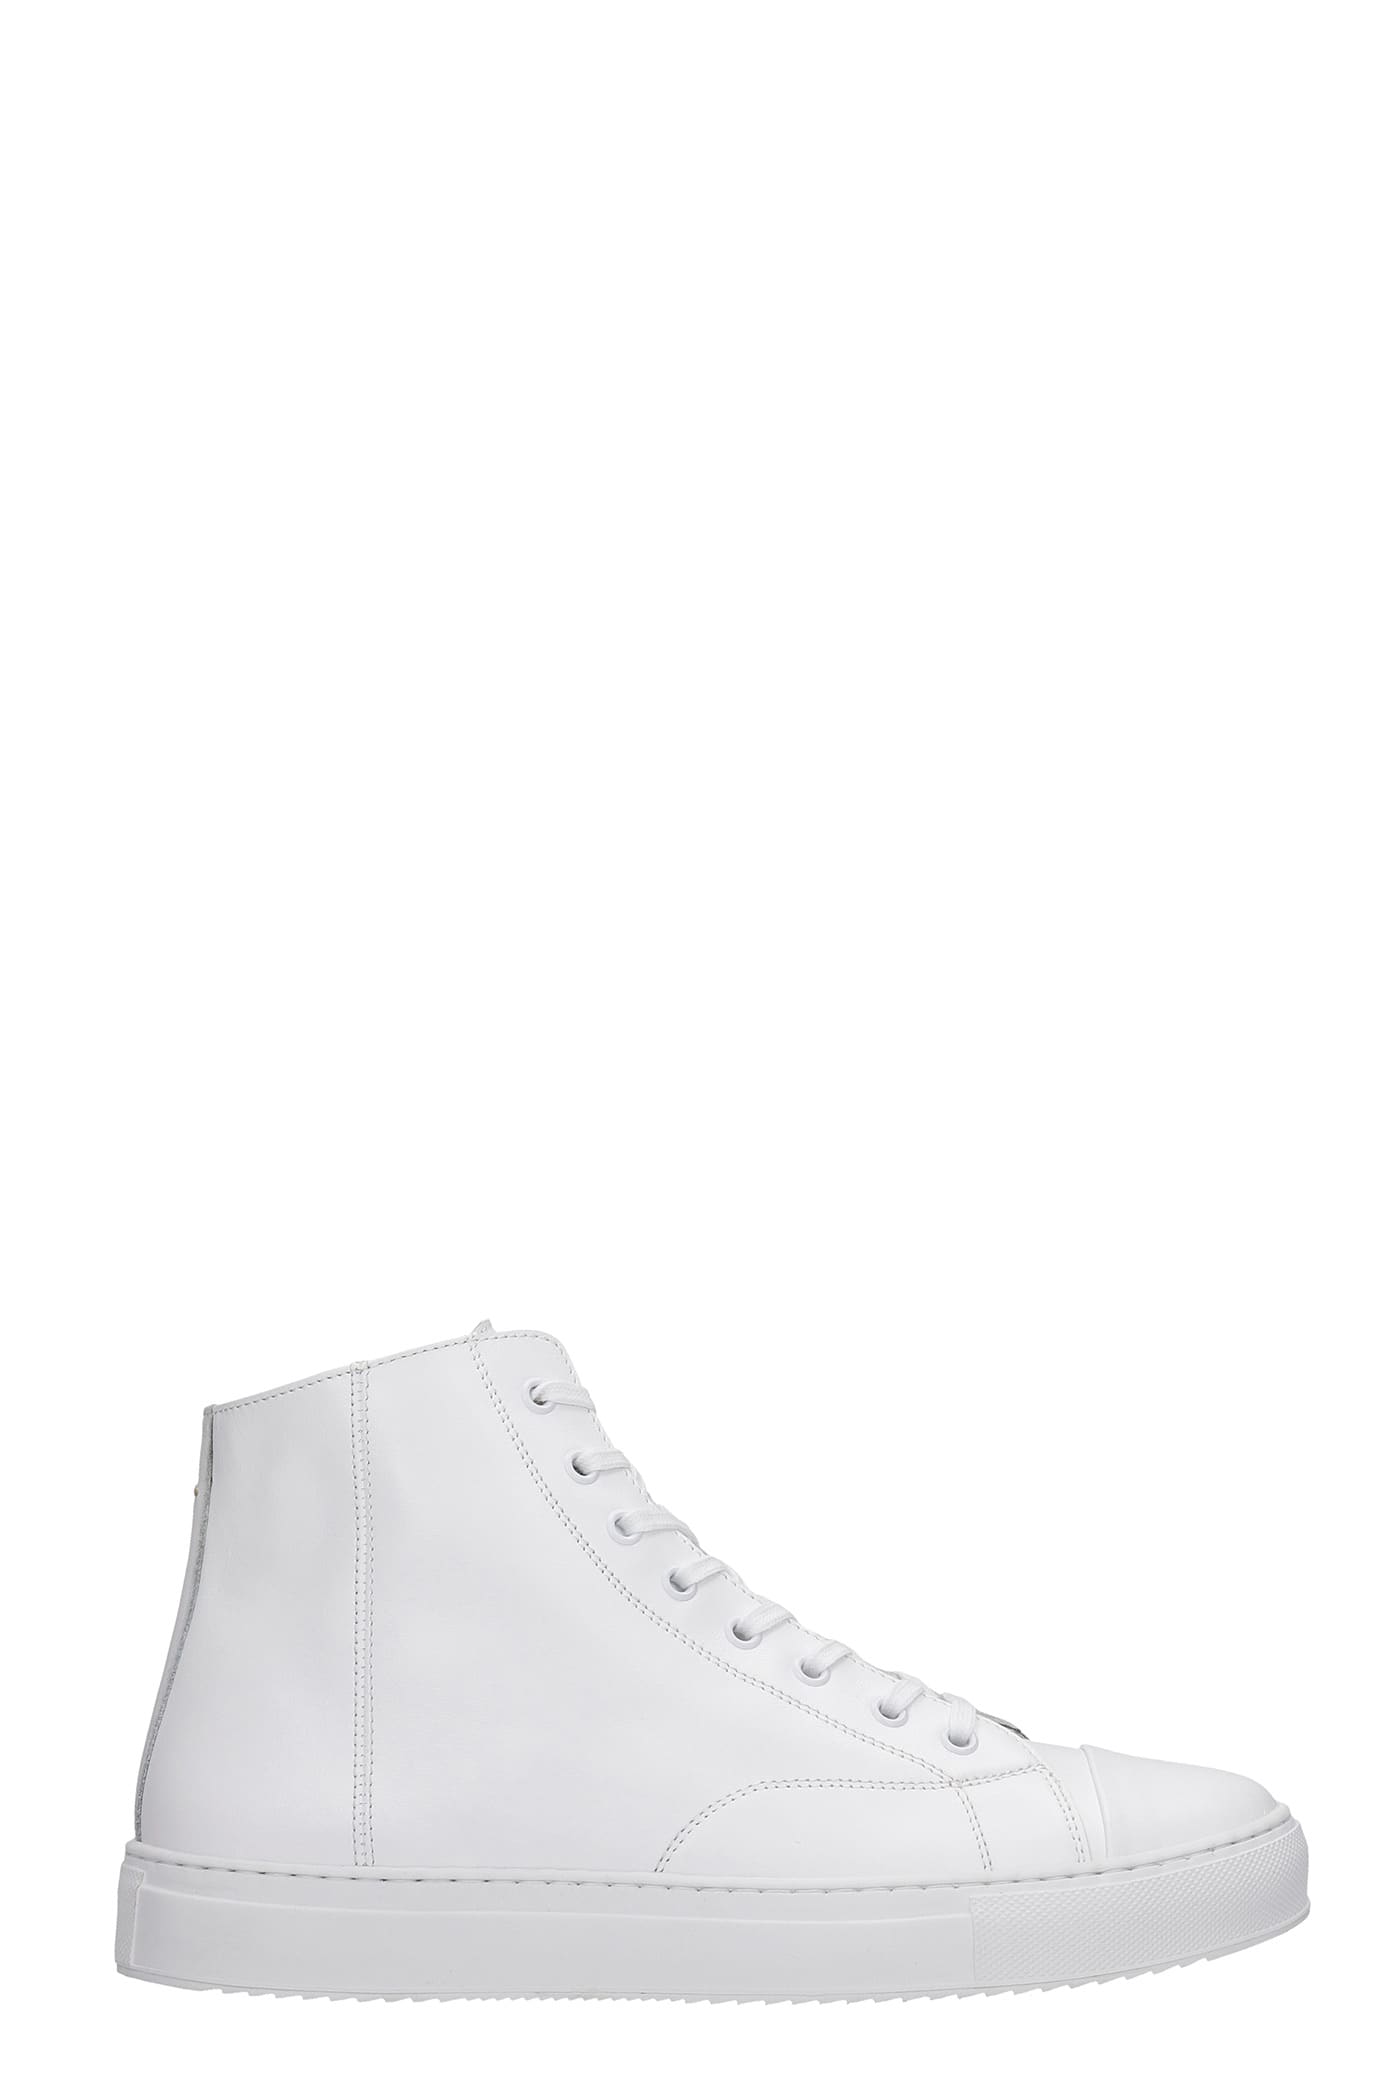 LOW BRAND BASKET SNEAKERS IN WHITE LEATHER,L1SSS215964A001